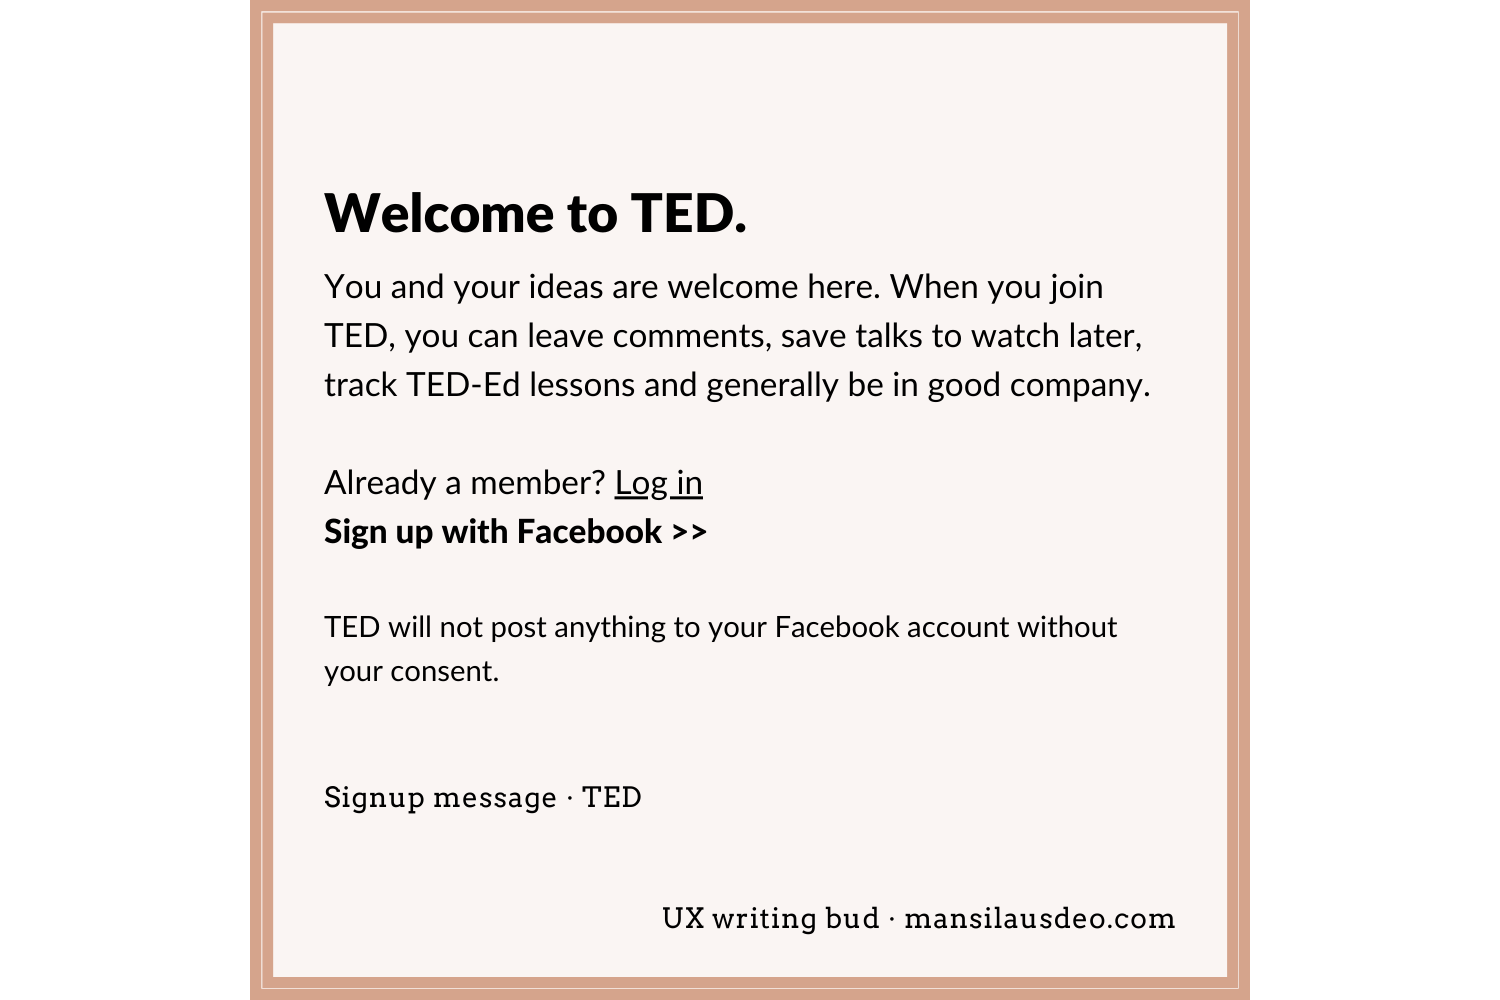 Welcome to TED. You and your ideas are welcome here. When you join TED, you can leave comments, save talks to watch later, track TED-Ed lessons and generally be in good company. Already a member? Log in Sign up with Facebook >> TED will not post anything to your Facebook account without your consent. OR First name Last name Email Password (At least 6 characters) Signup form • TED UX writing bud